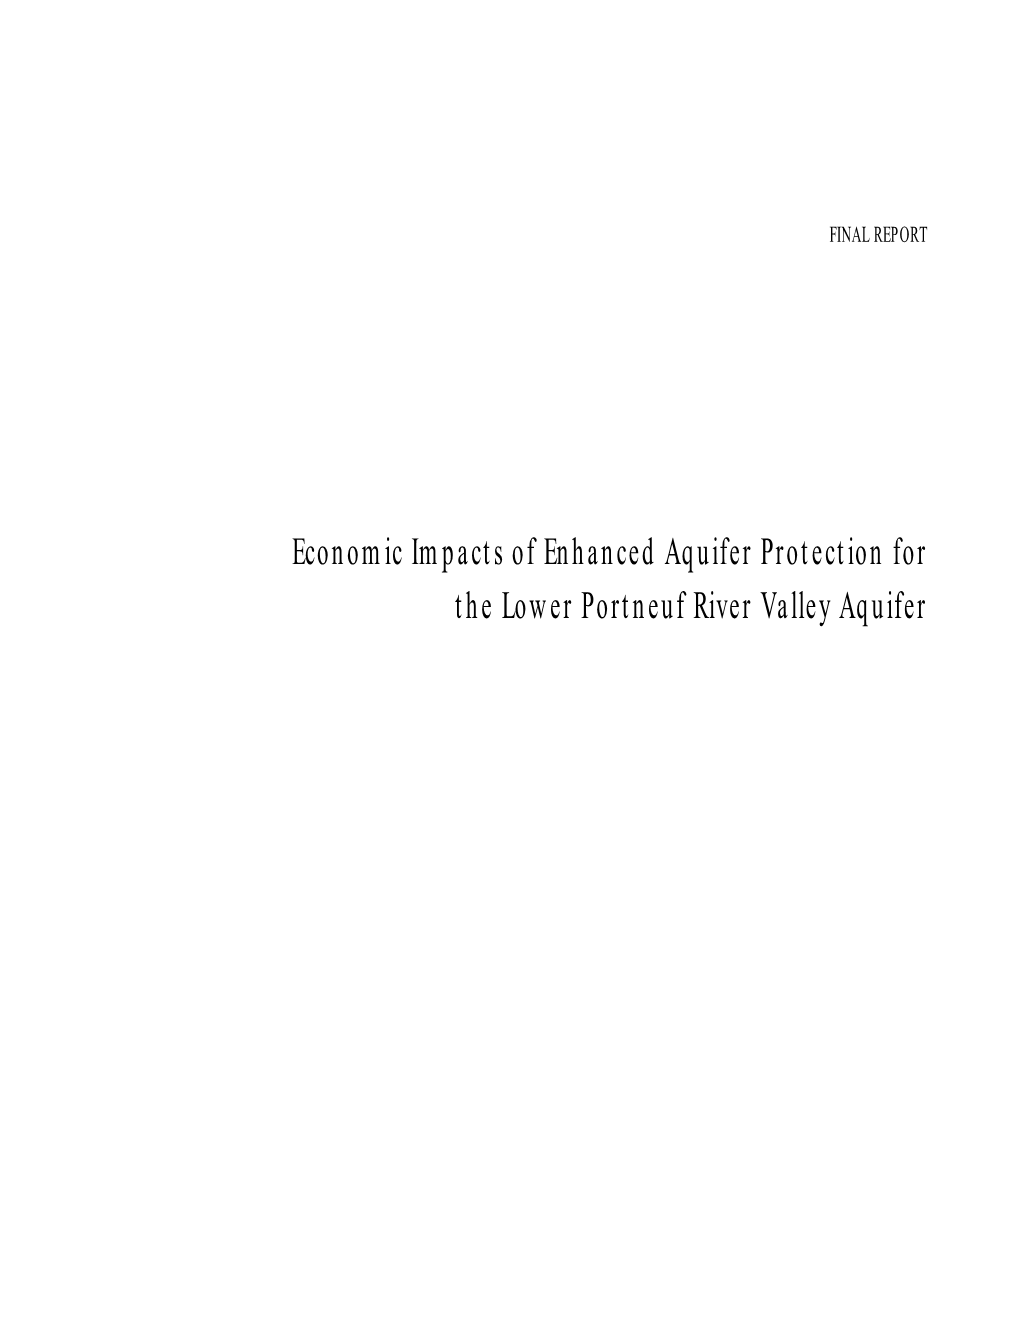 Economic Impacts of Enhanced Aquifer Protection for the Lower Portneuf River Valley Aquifer FINAL REPORT September 5, 2001